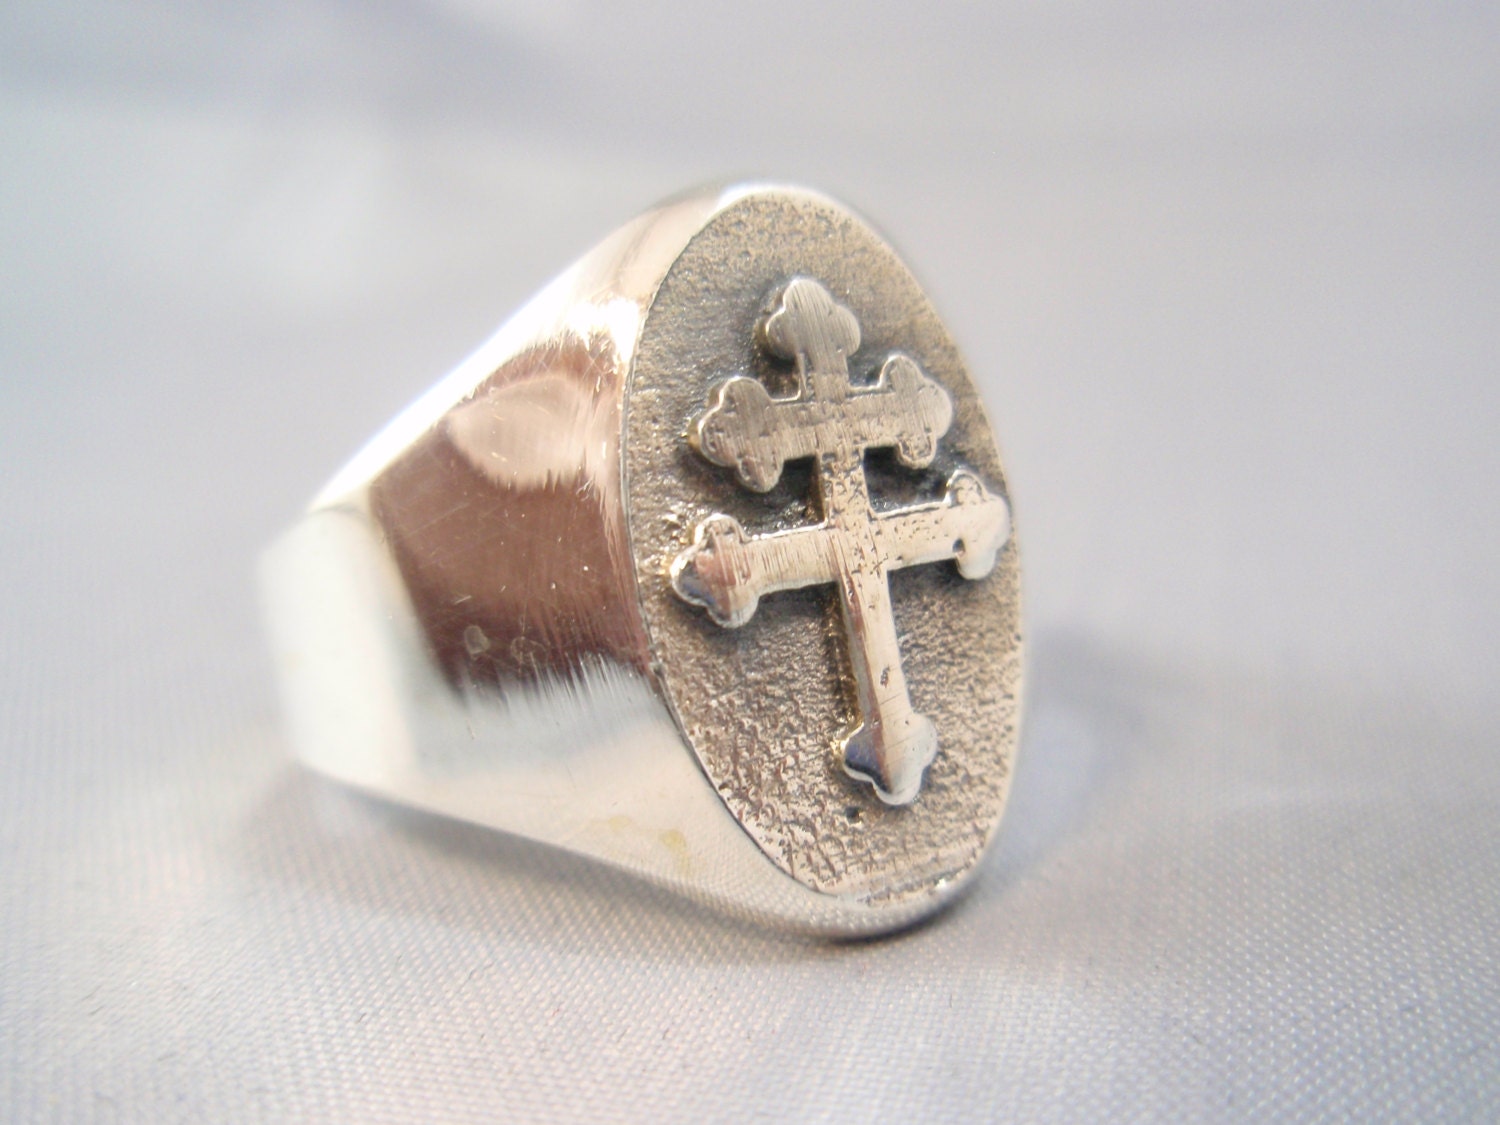 CROSS OF LORRAINE ring sterling silver 925 french foreign